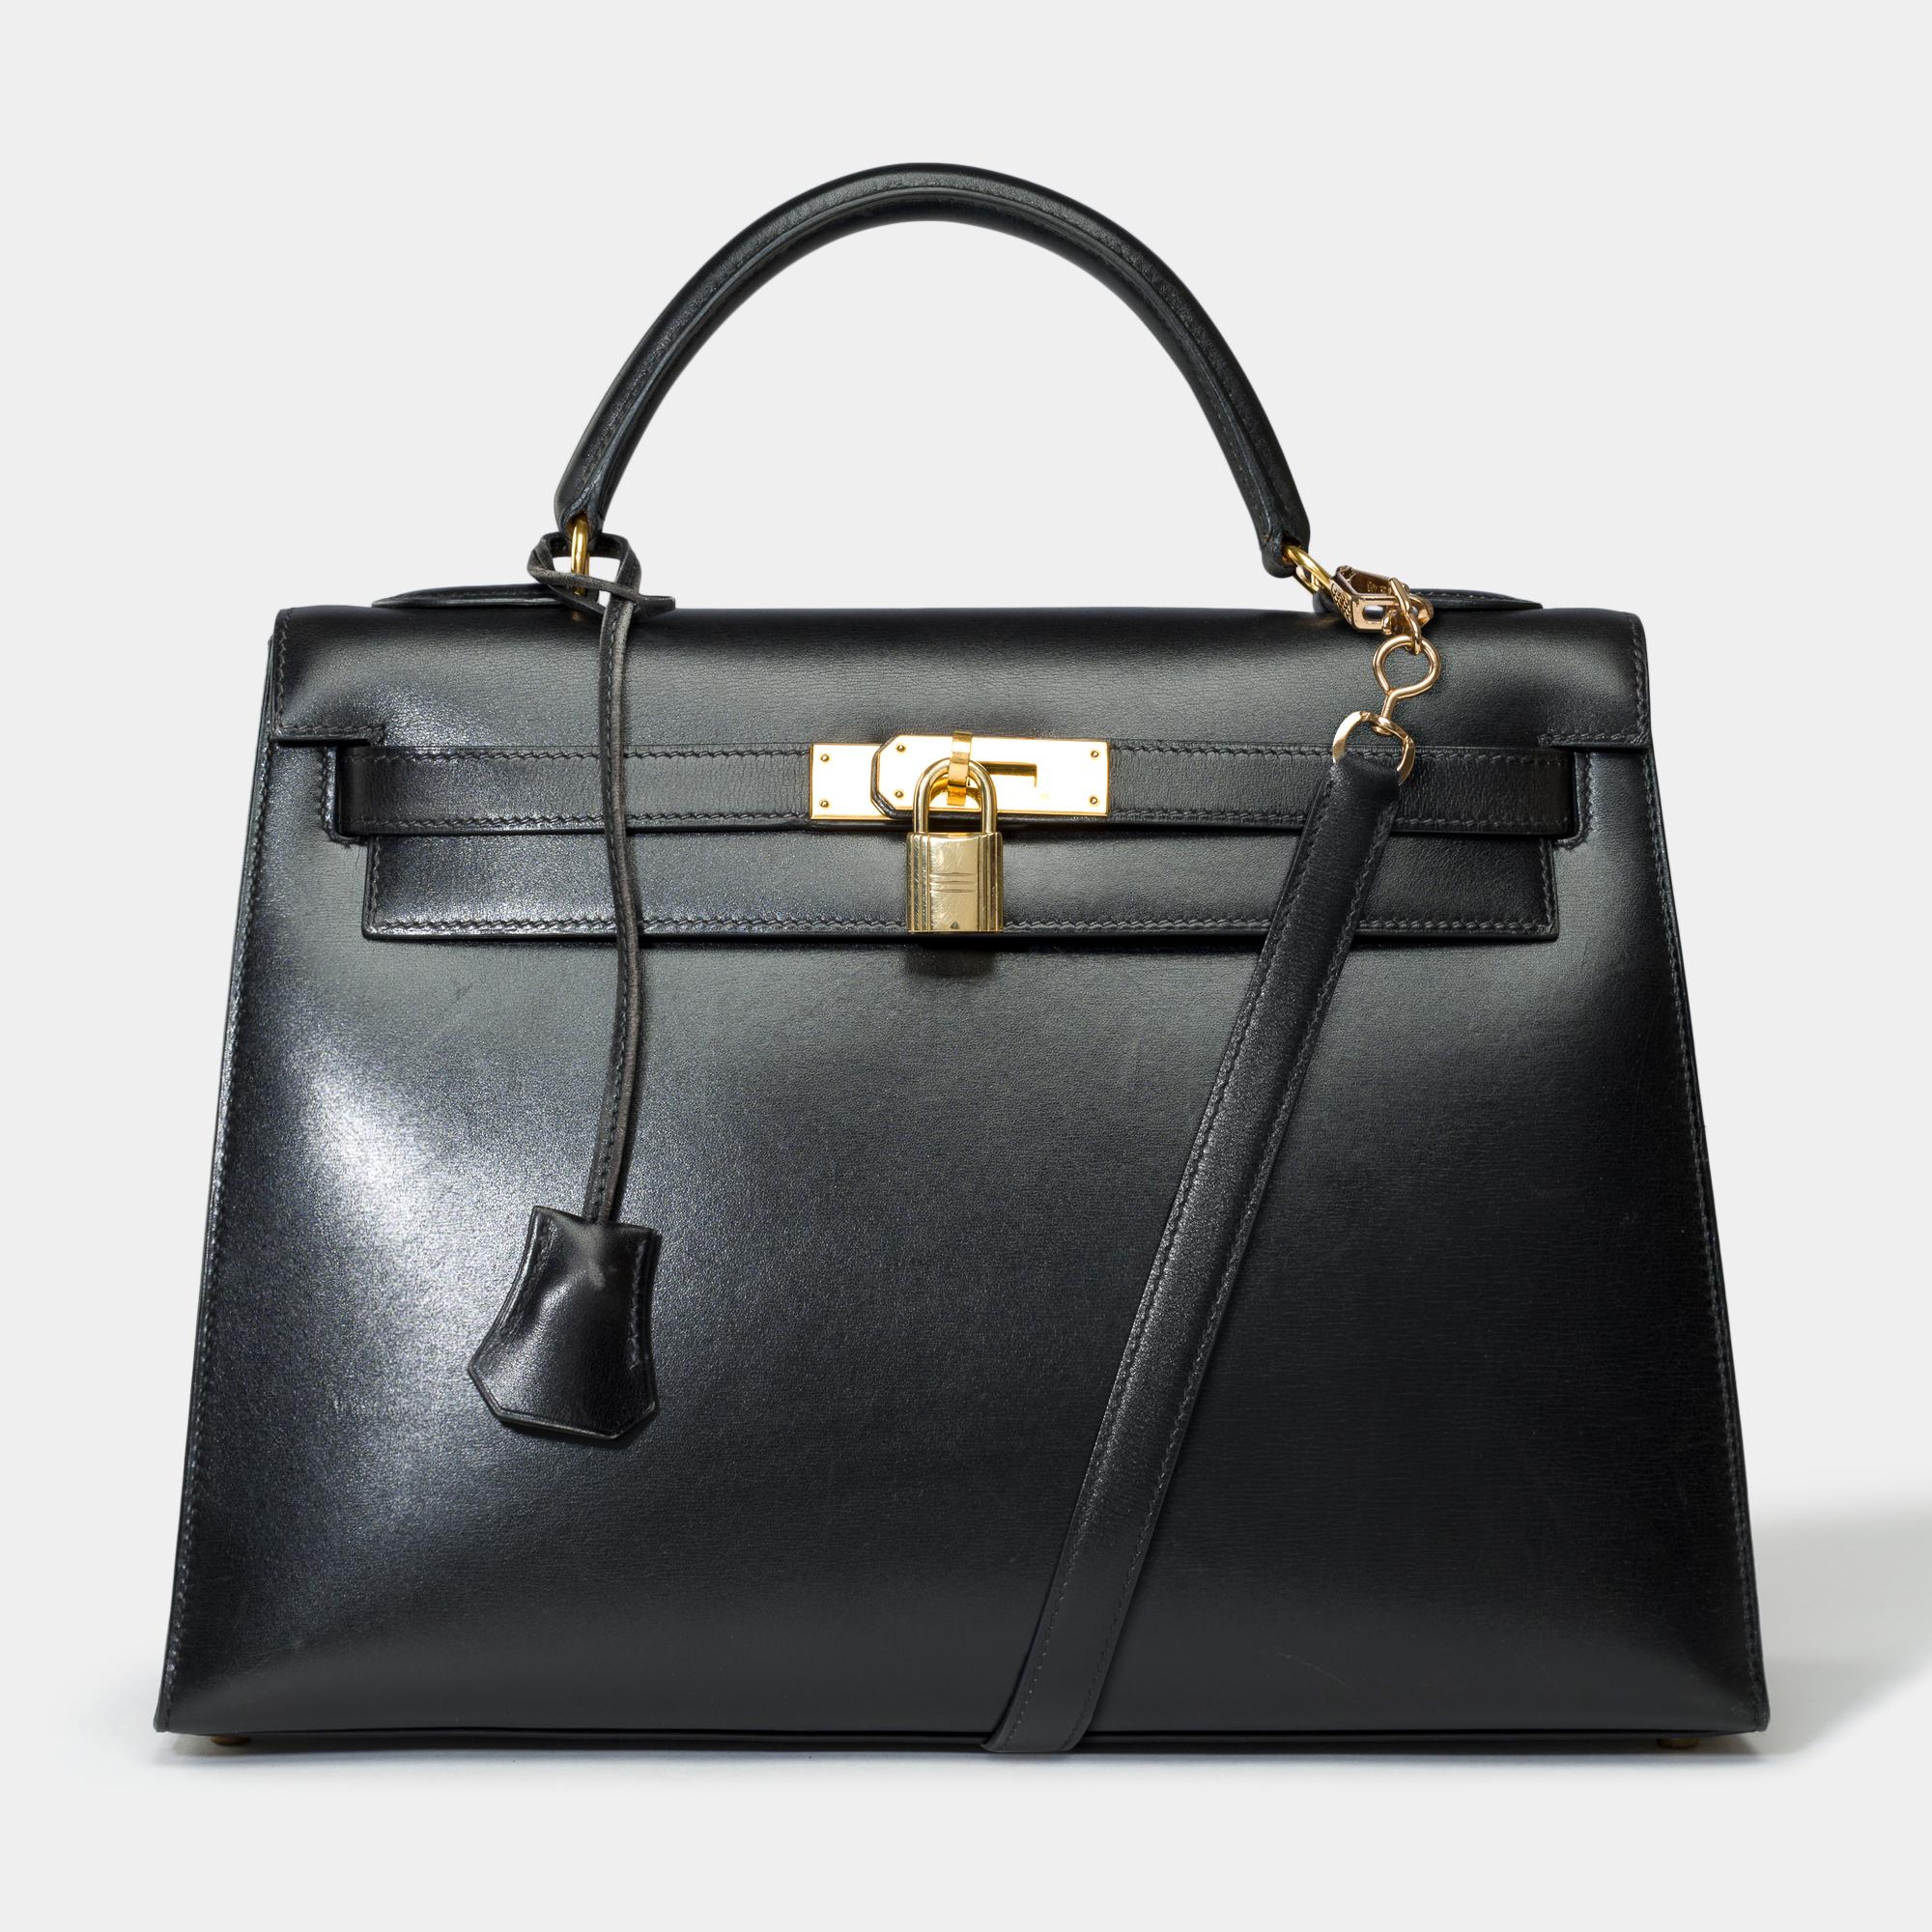 Beautiful​ ​Hermès​ ​Kelly​ ​32​ ​sellier​ ​handbag​ ​strap​ ​in​ ​black​ ​box​ ​calf​ ​leather,​ ​gold​ ​plated​ ​metal​ ​trim,​ ​compatible​ ​removable​ ​shoulder​ ​strap​ ​not​ ​original​ ​(not​ ​signed​ ​Hermès)​ ​in​ ​black​ ​box​ ​leather​ ​,​